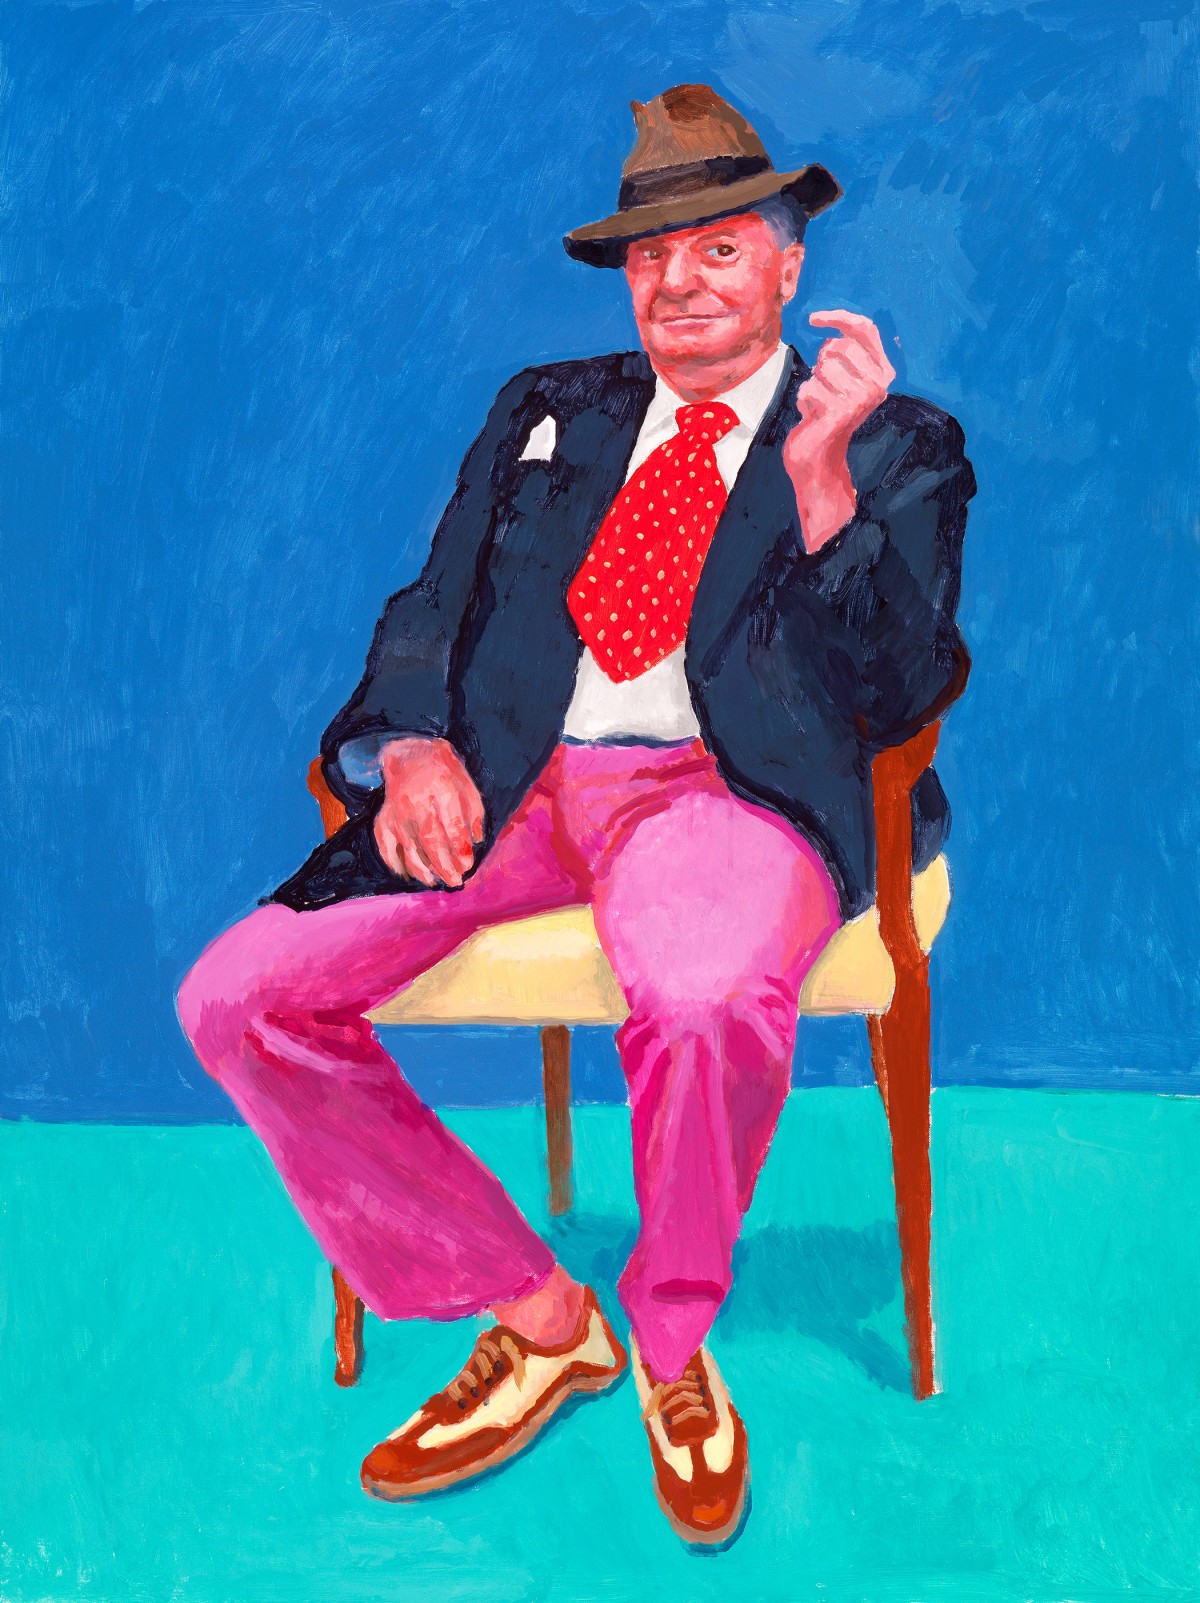 Image: David Hockney, Barry Humphries, 26th, 27th, 28th March 2015 from 82 Portraits and 1 Still-life, 2015